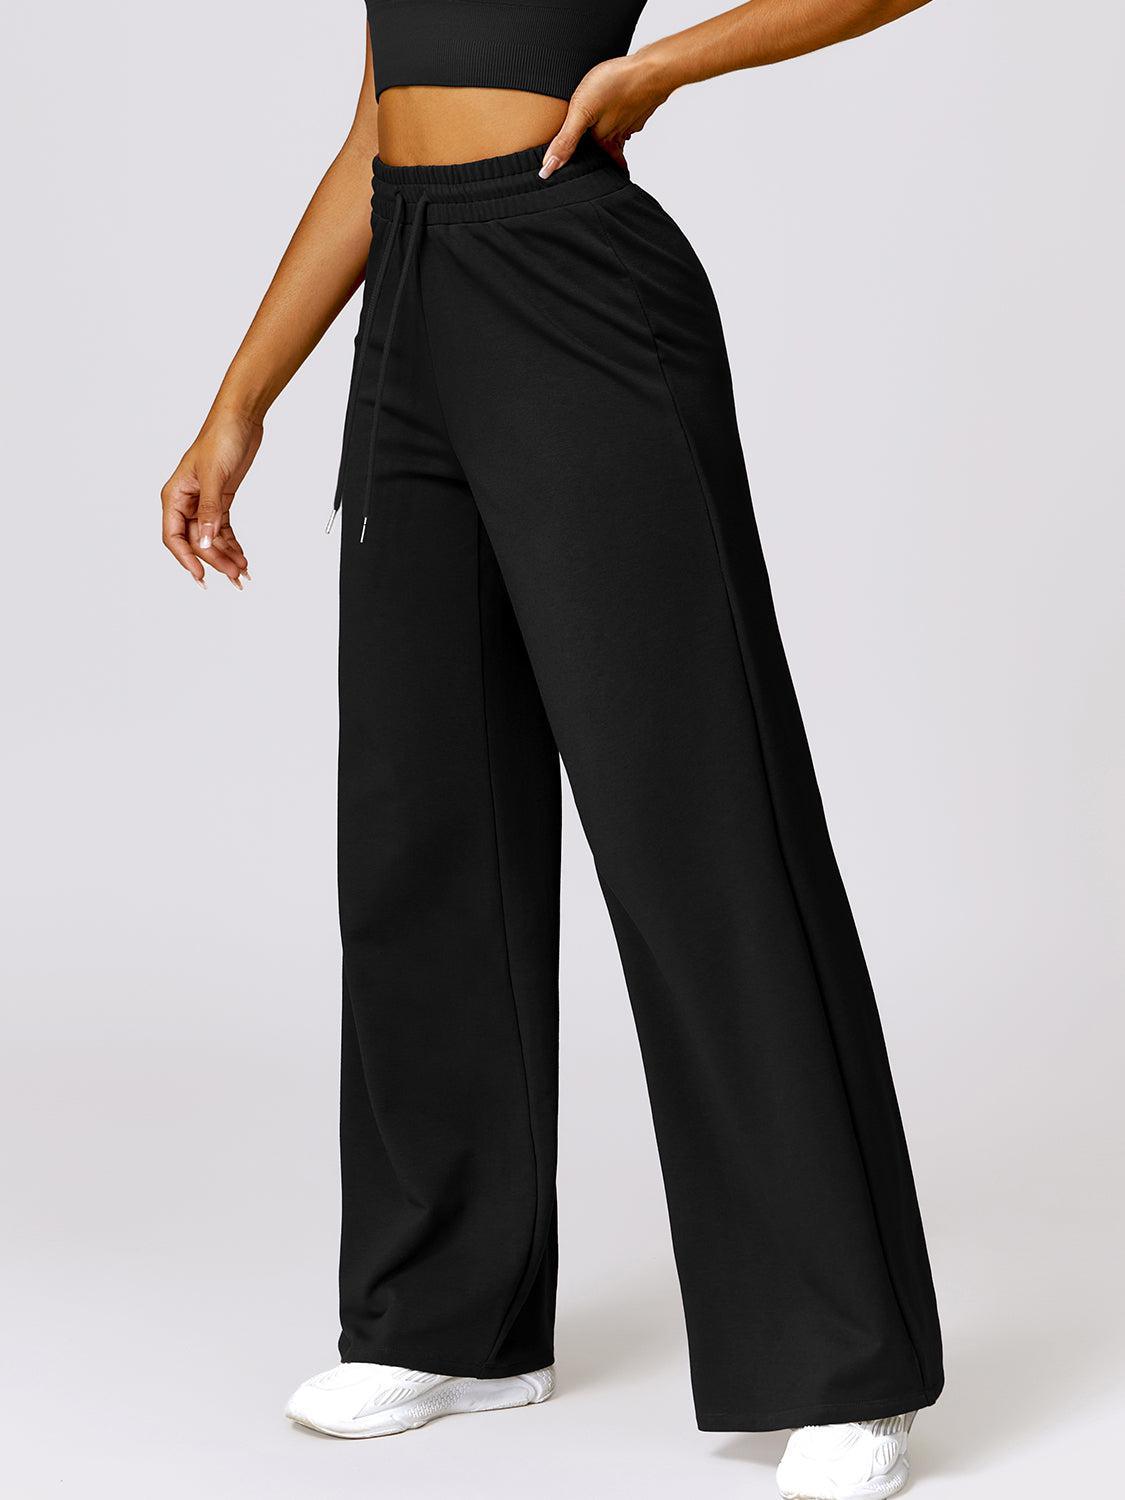 a woman in a black crop top and wide legged pants